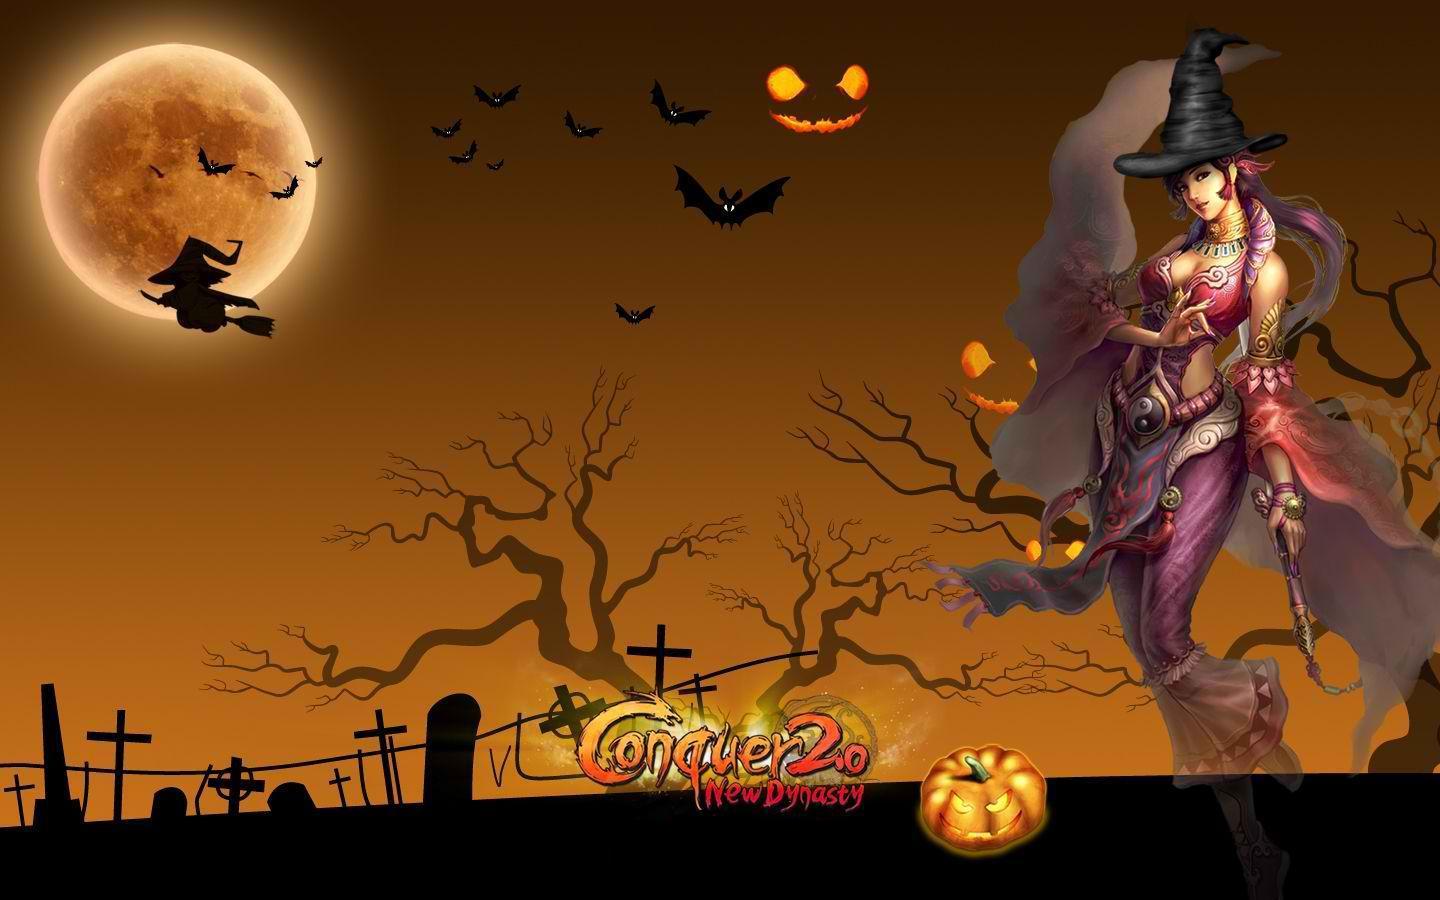 Halloween Witch Wallpapers - Wallpaper Cave